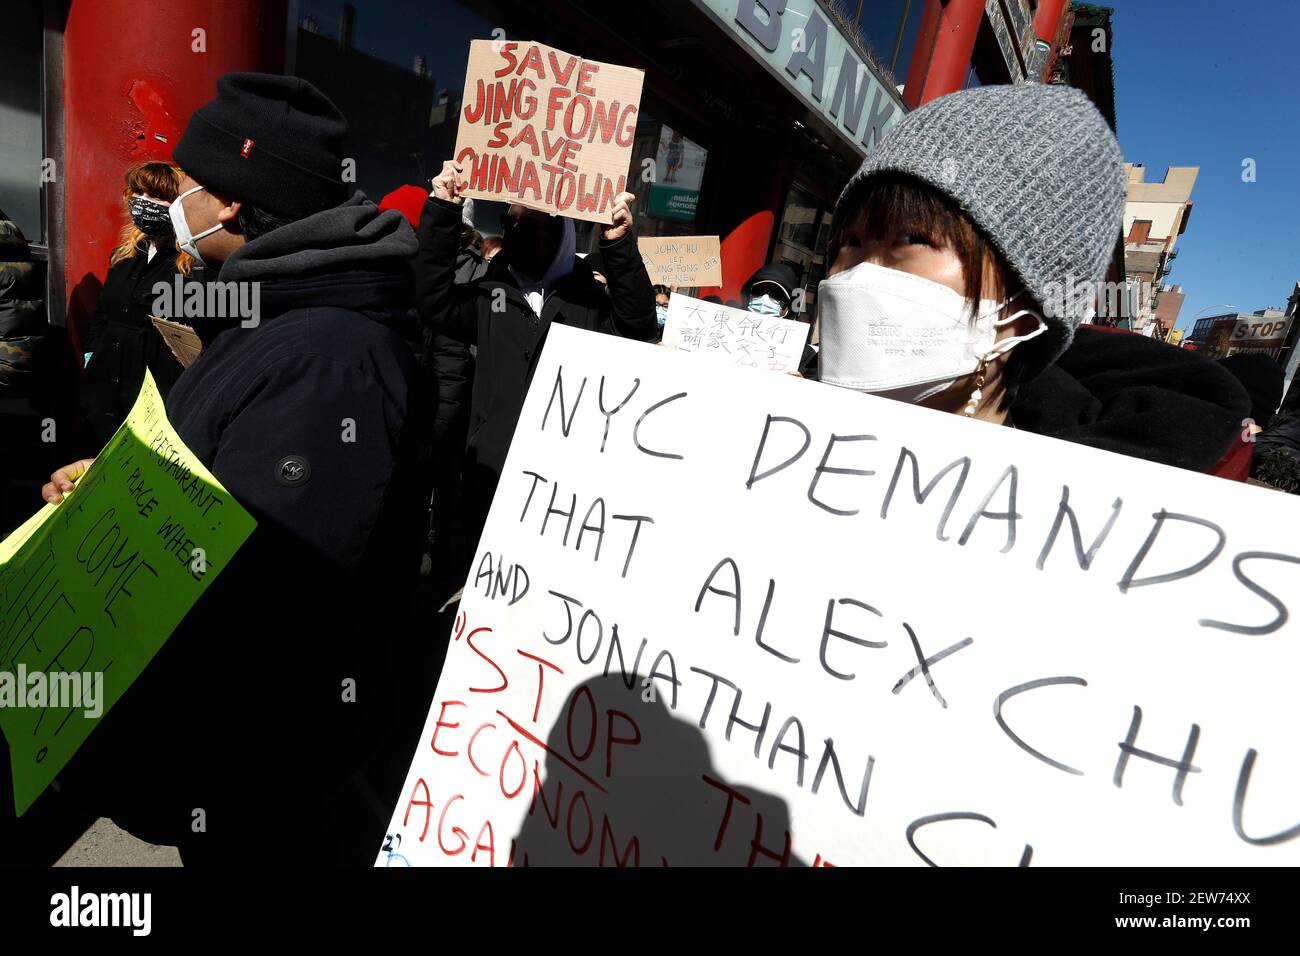 Demonstrators from 318 restaurant workers union hold up placards during a demonstration against the closure of Jing Fong restaurant in Chinatown. Recent extraordinary rental demands placed by Jonathan Chu, the biggest landlord in Chinatown, on small business has forced many to shutter their doors. Such demands have forced Jing Fong restaurant to end operations by March 7, 2021. Stock Photo